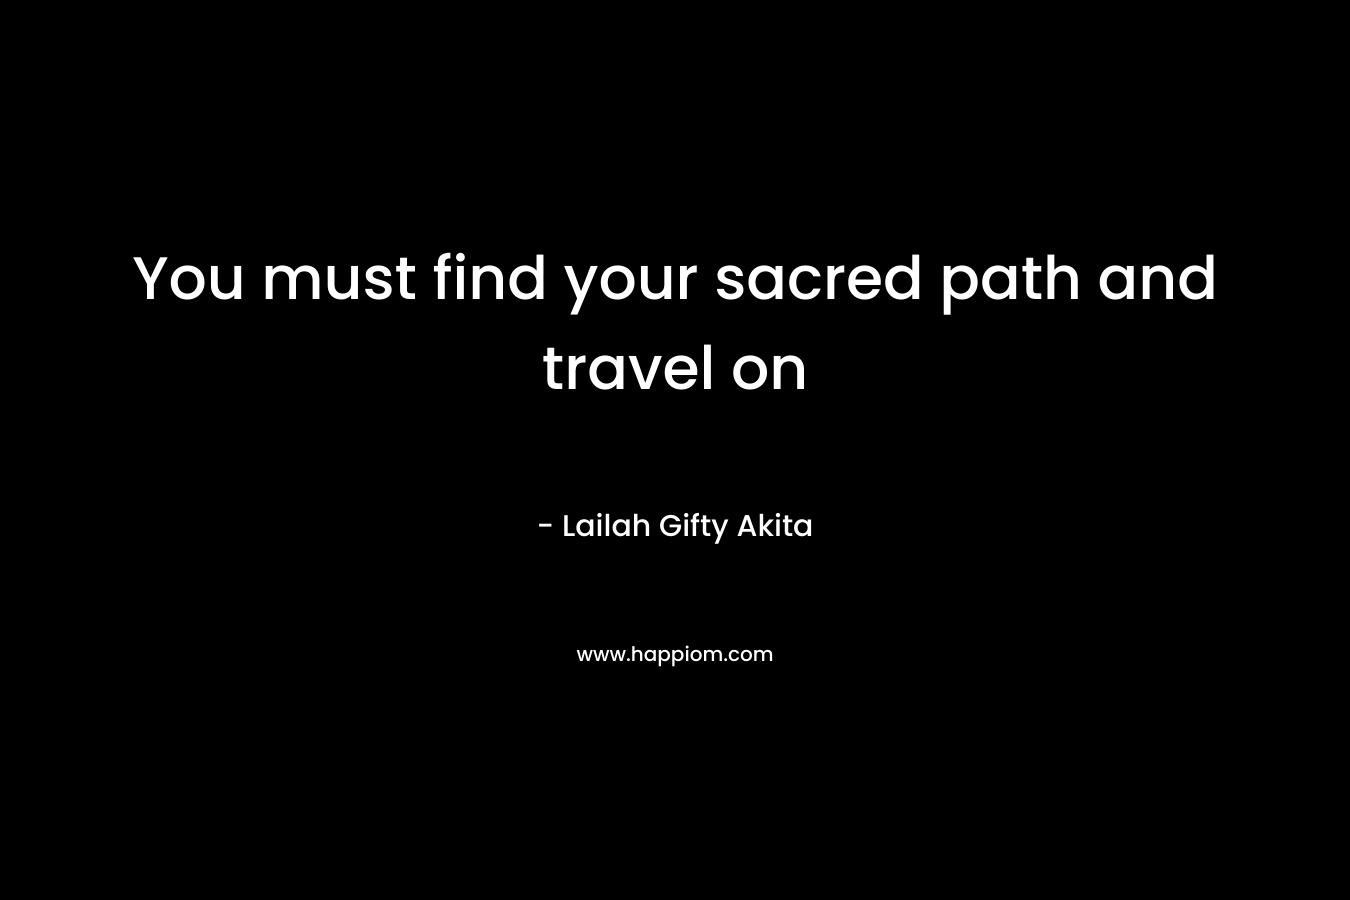 You must find your sacred path and travel on